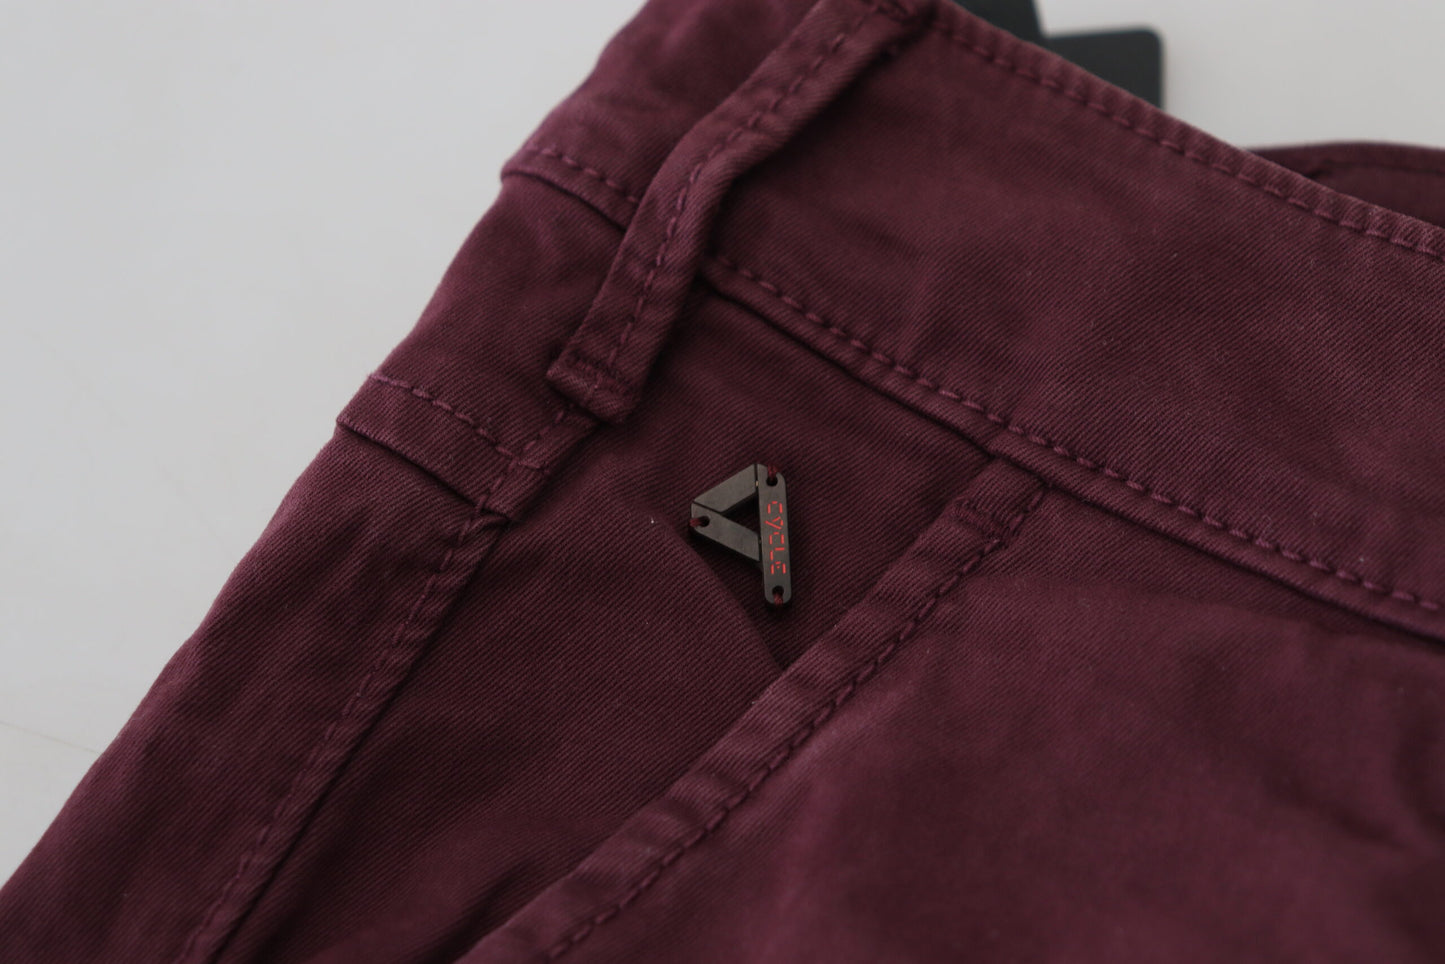 CYCLE Maroon Cotton Stretch Skinny Casual Men Pants